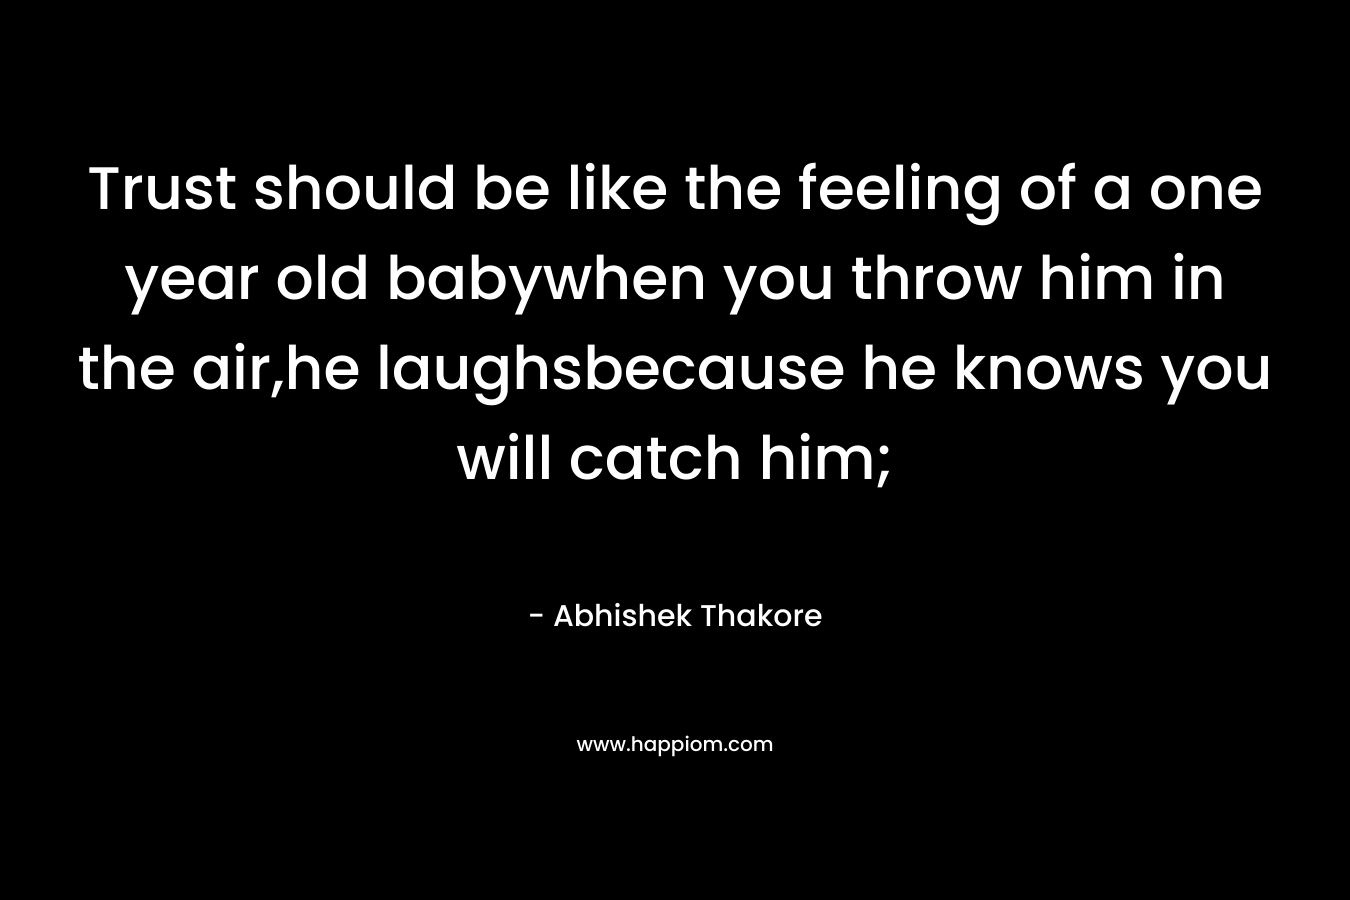 Trust should be like the feeling of a one year old babywhen you throw him in the air,he laughsbecause he knows you will catch him; – Abhishek Thakore